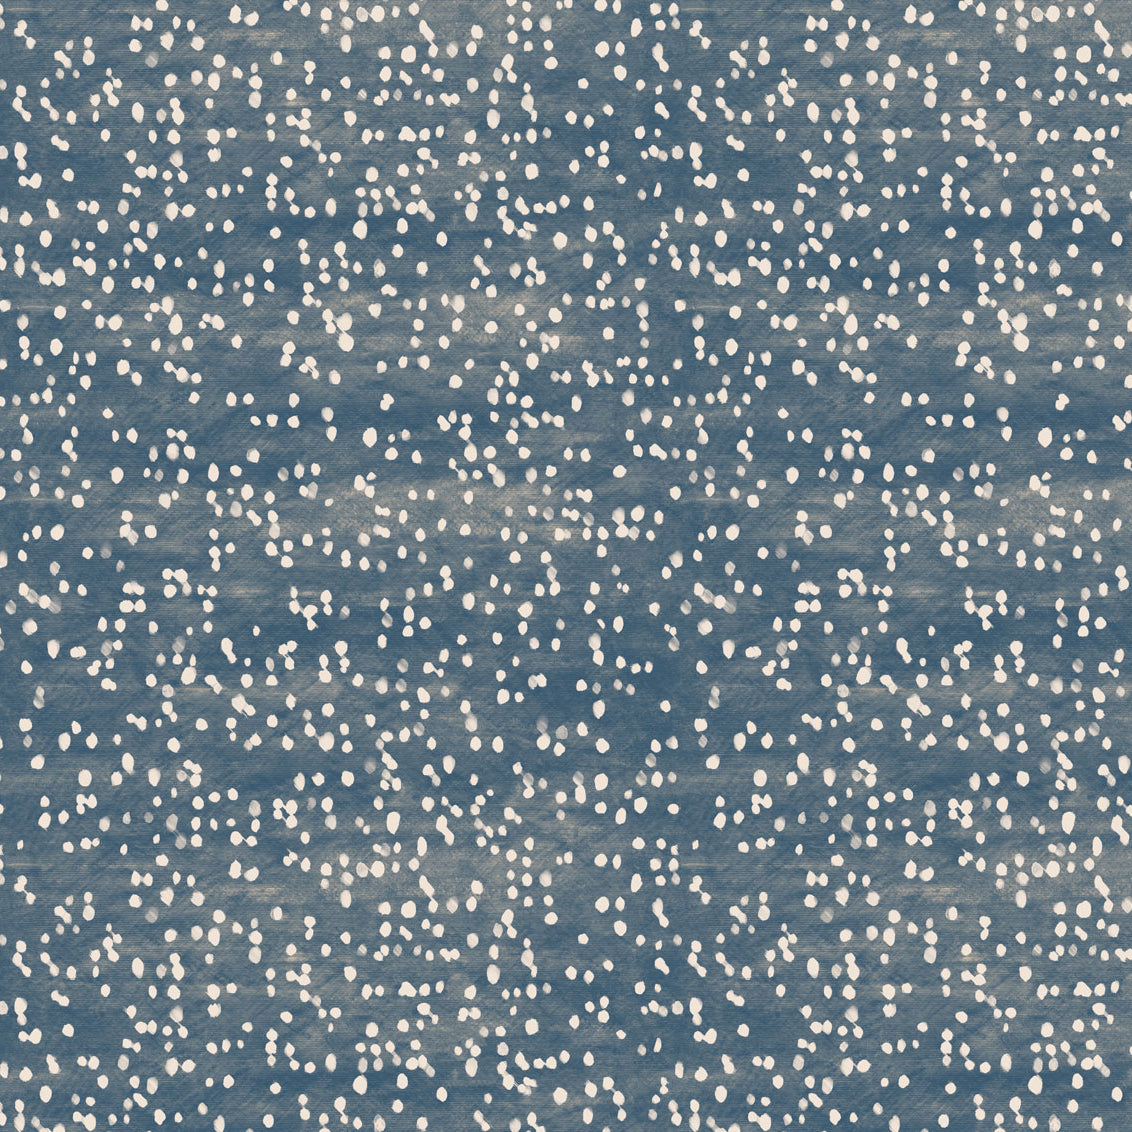 Detail of fabric in an abstract dotted pattern in white on a mottled denim field.